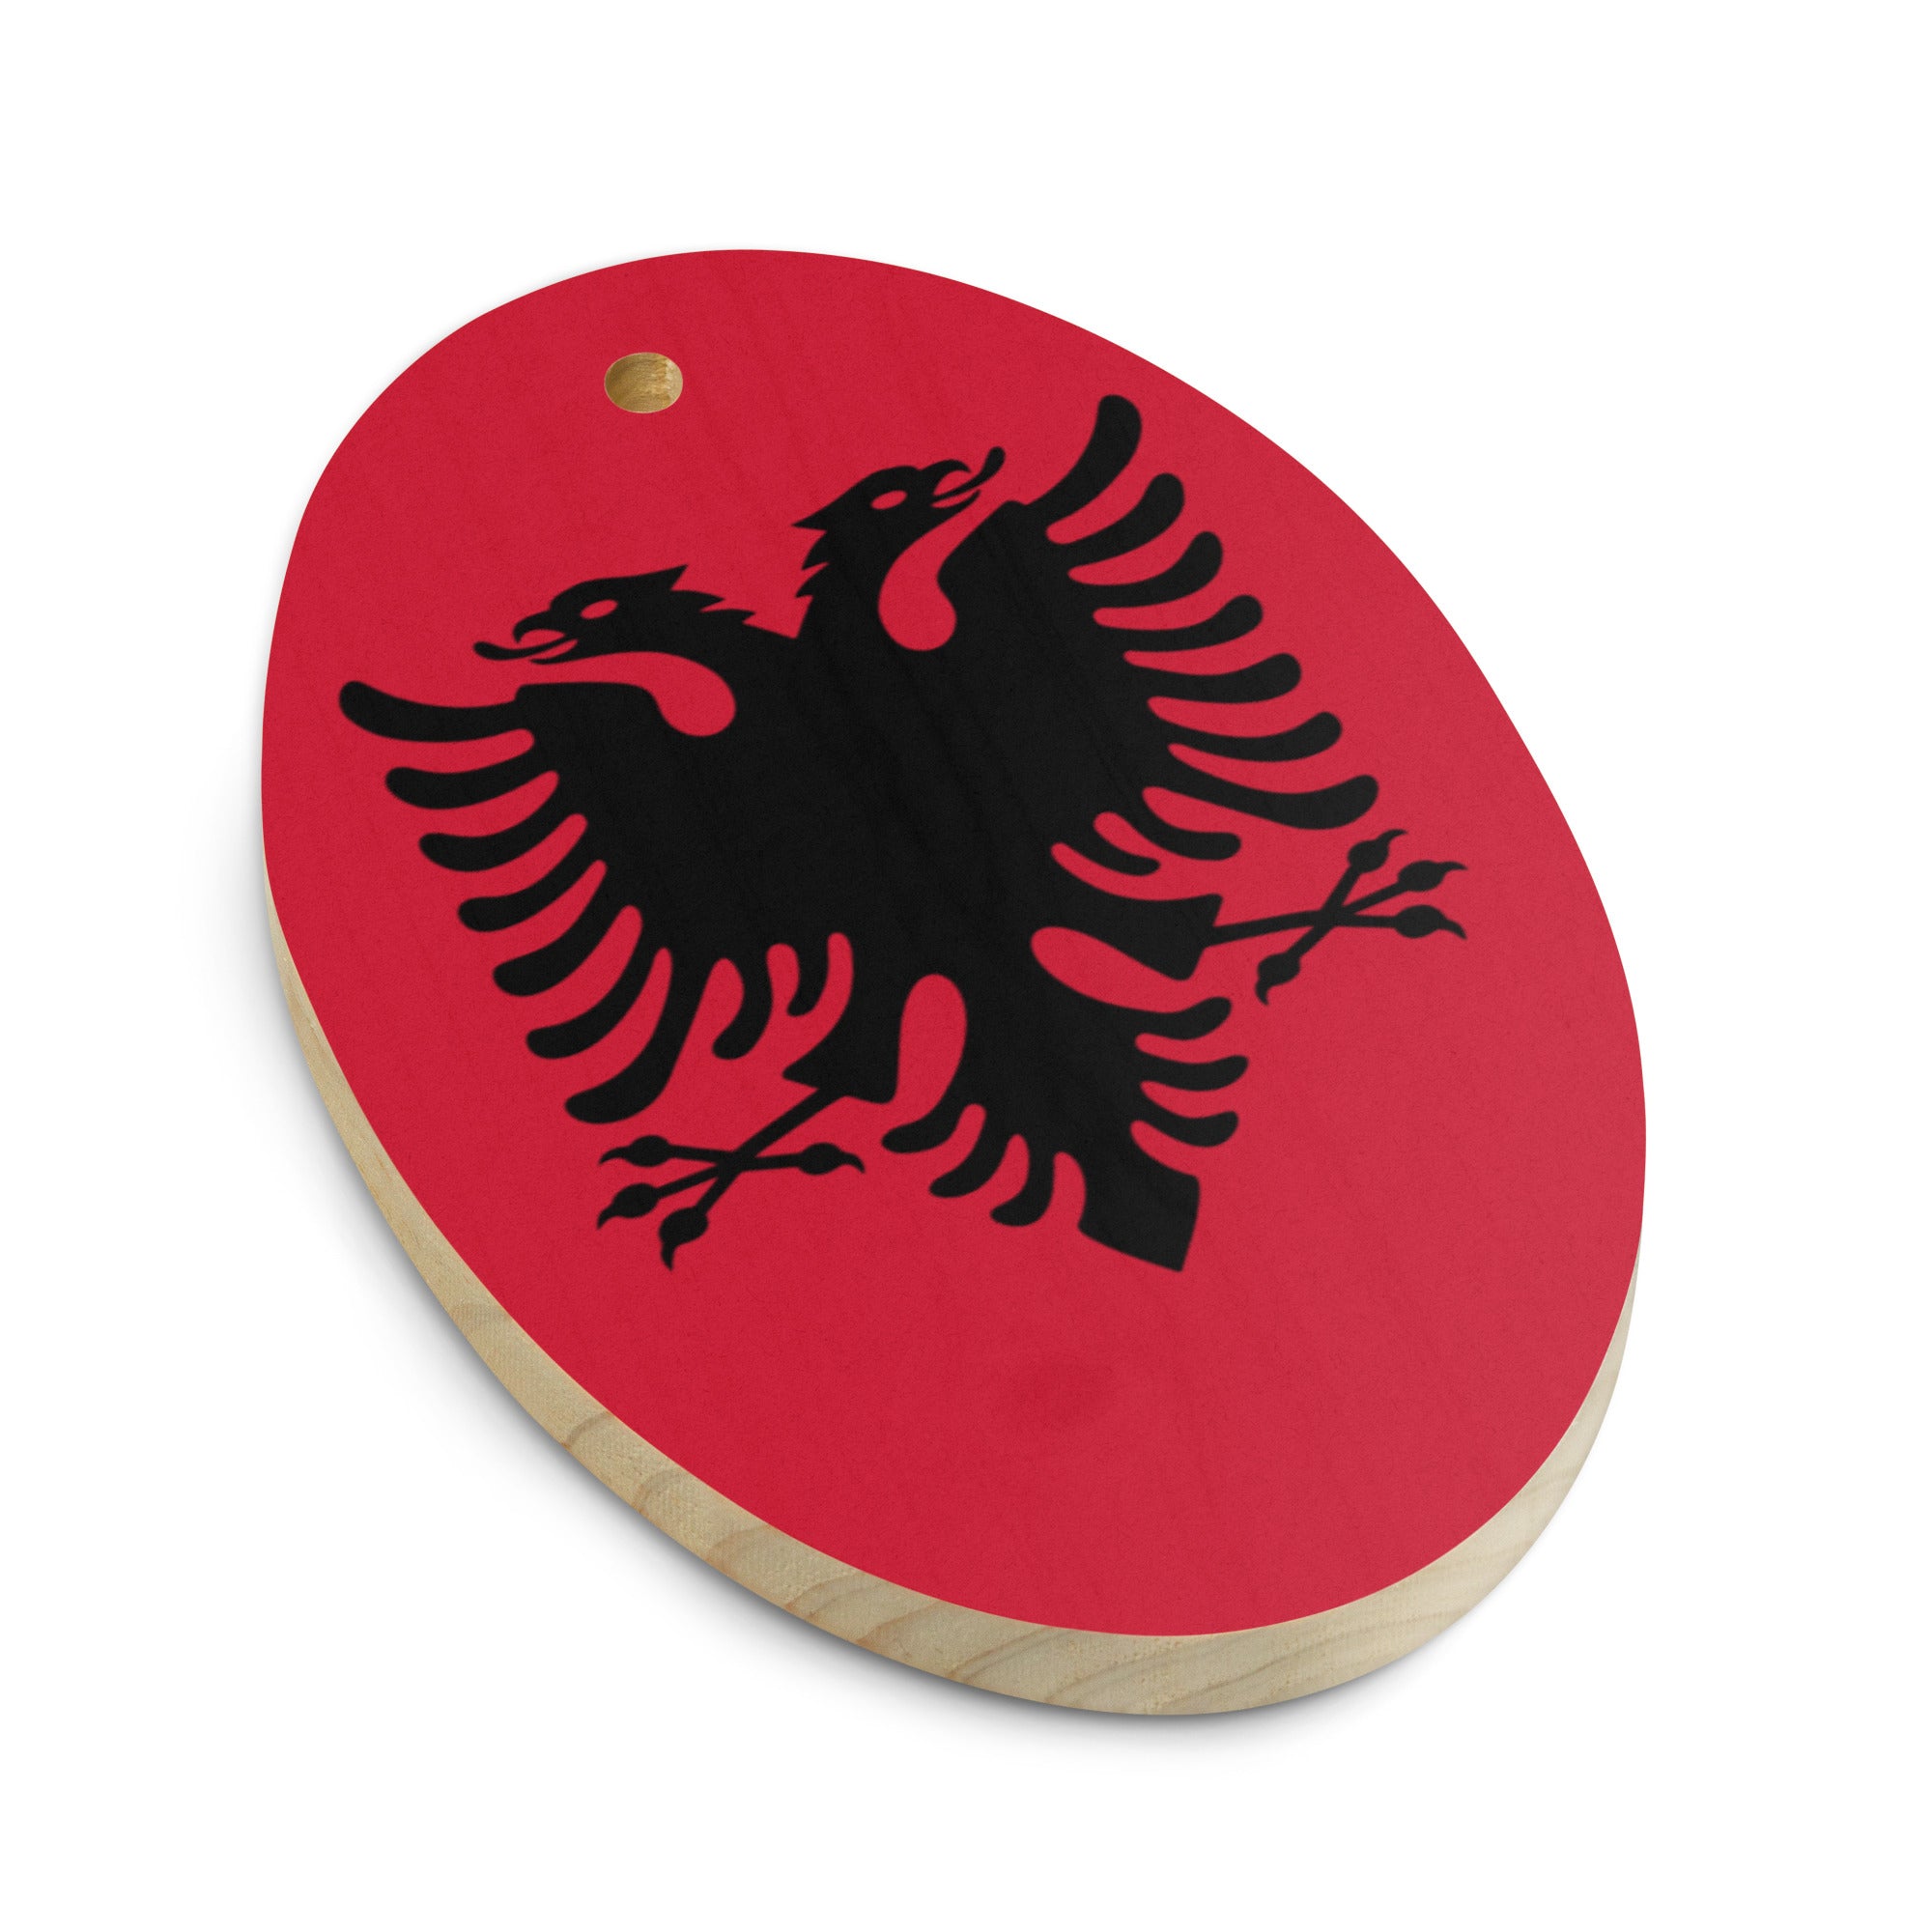 Wooden ornaments Albanian flag Christmas tree decorations.